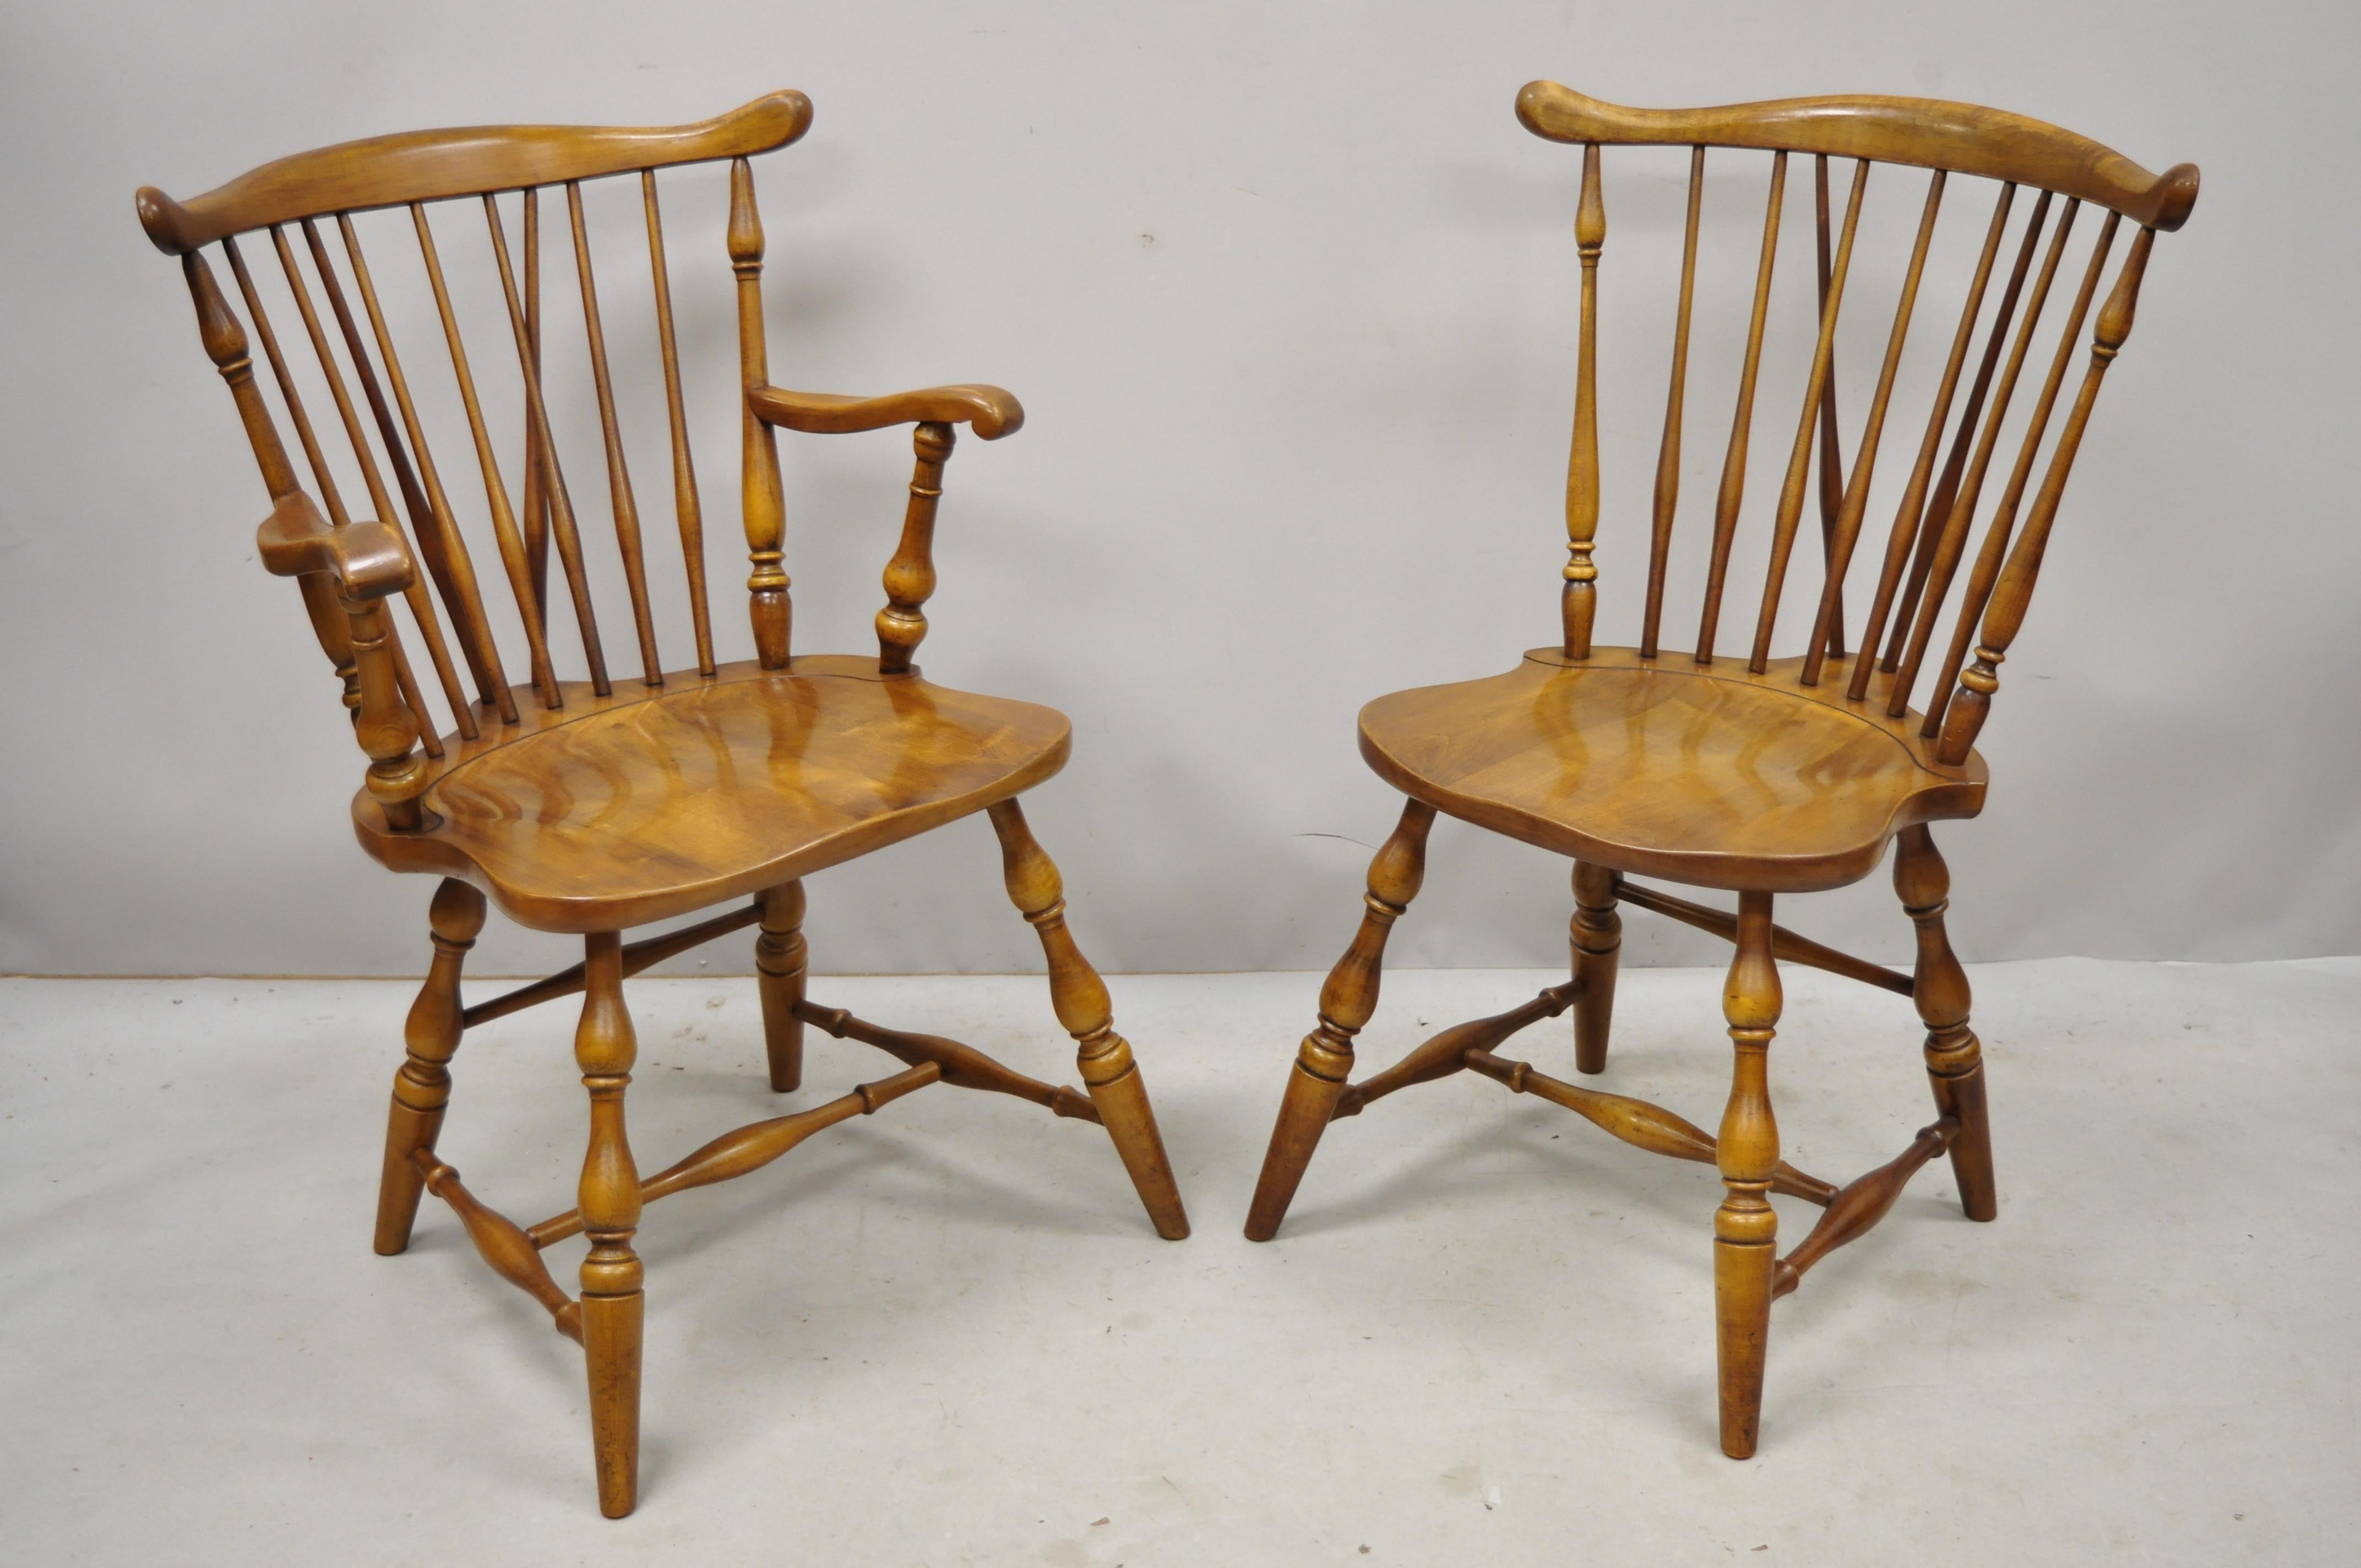 Set of 4 Pennsylvania house rock maple wood colonial Windsor dining chairs. Listing features (2) armchairs, (2) side chairs, solid wood construction, beautiful wood grain, original stamp, quality American craftsmanship, great style and form, circa